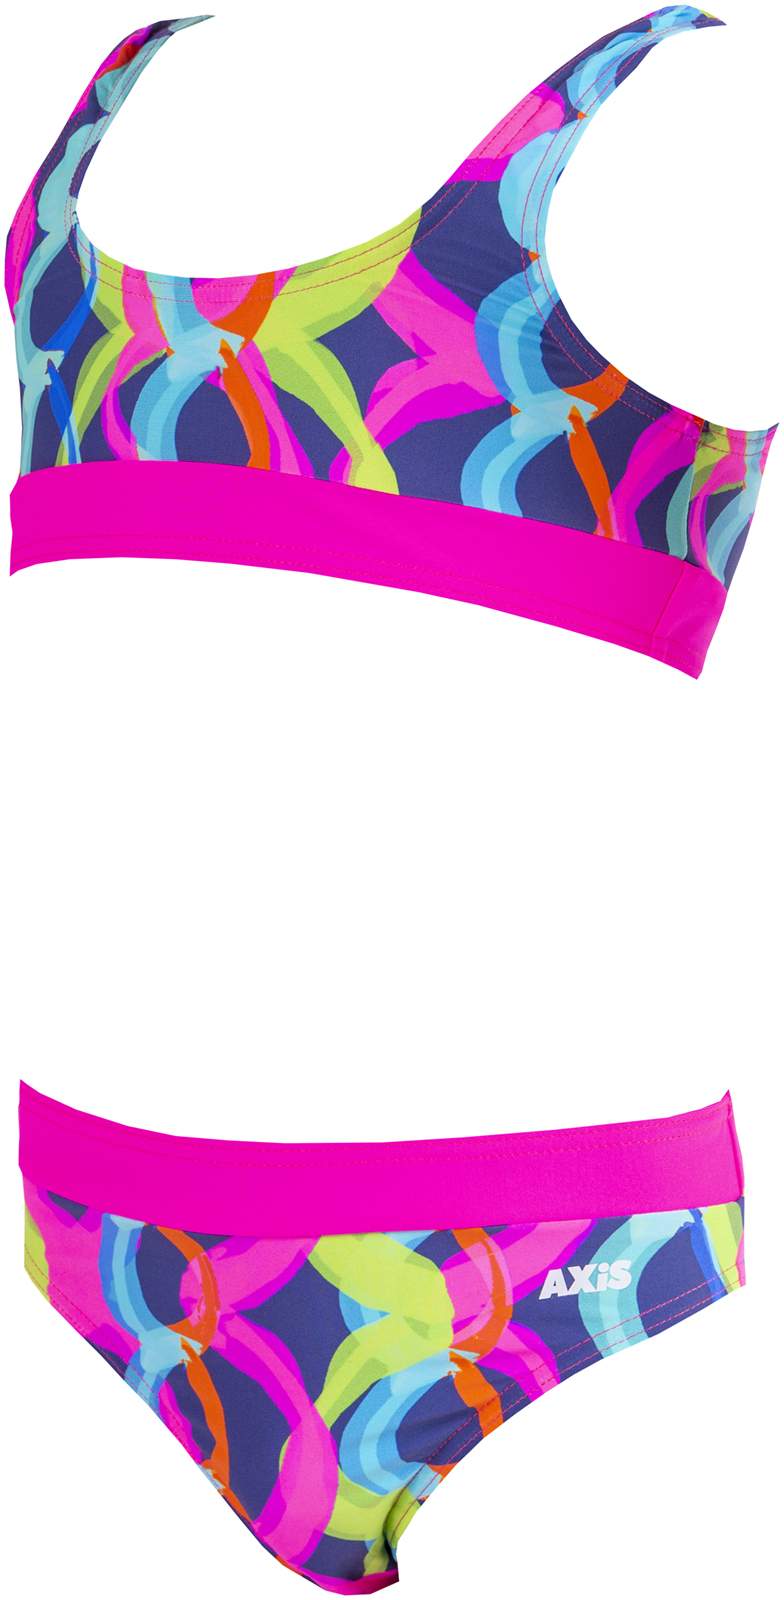 Girls’ two-piece swimsuit